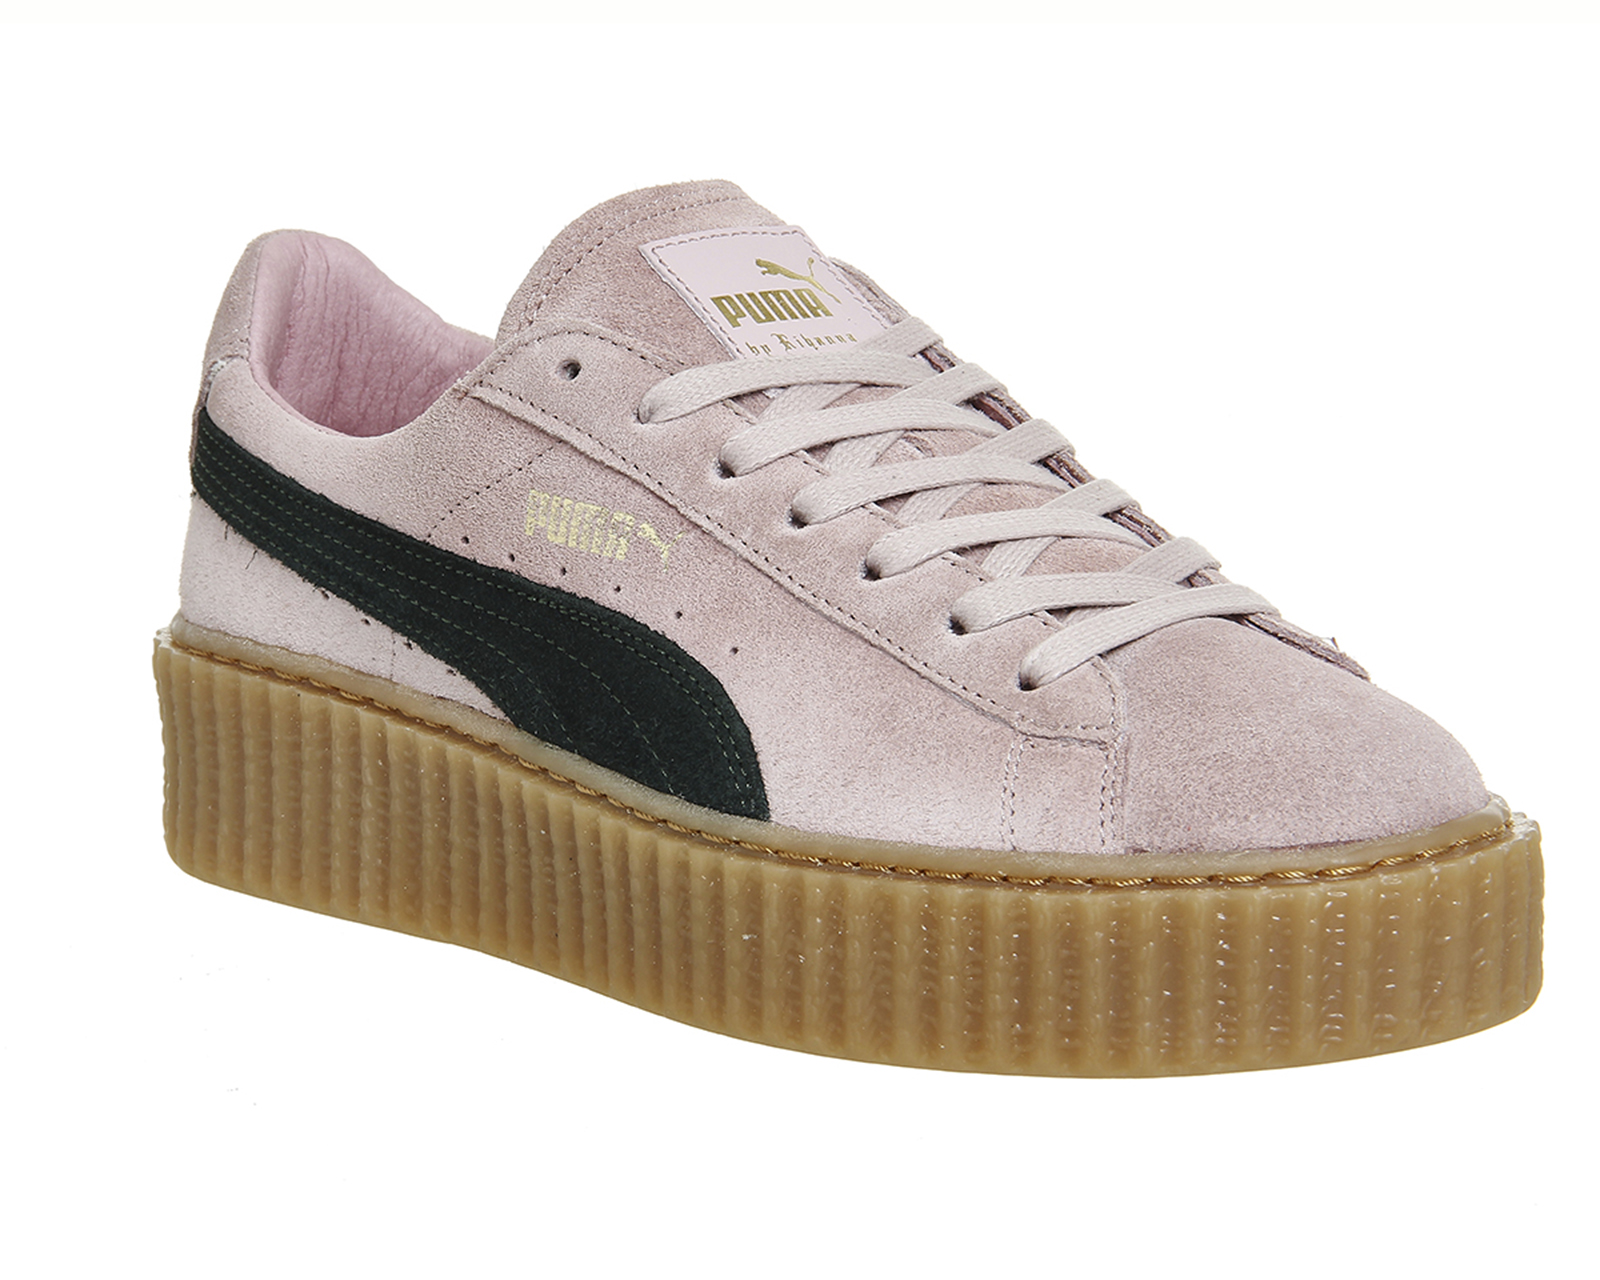 yellow and pink puma creepers